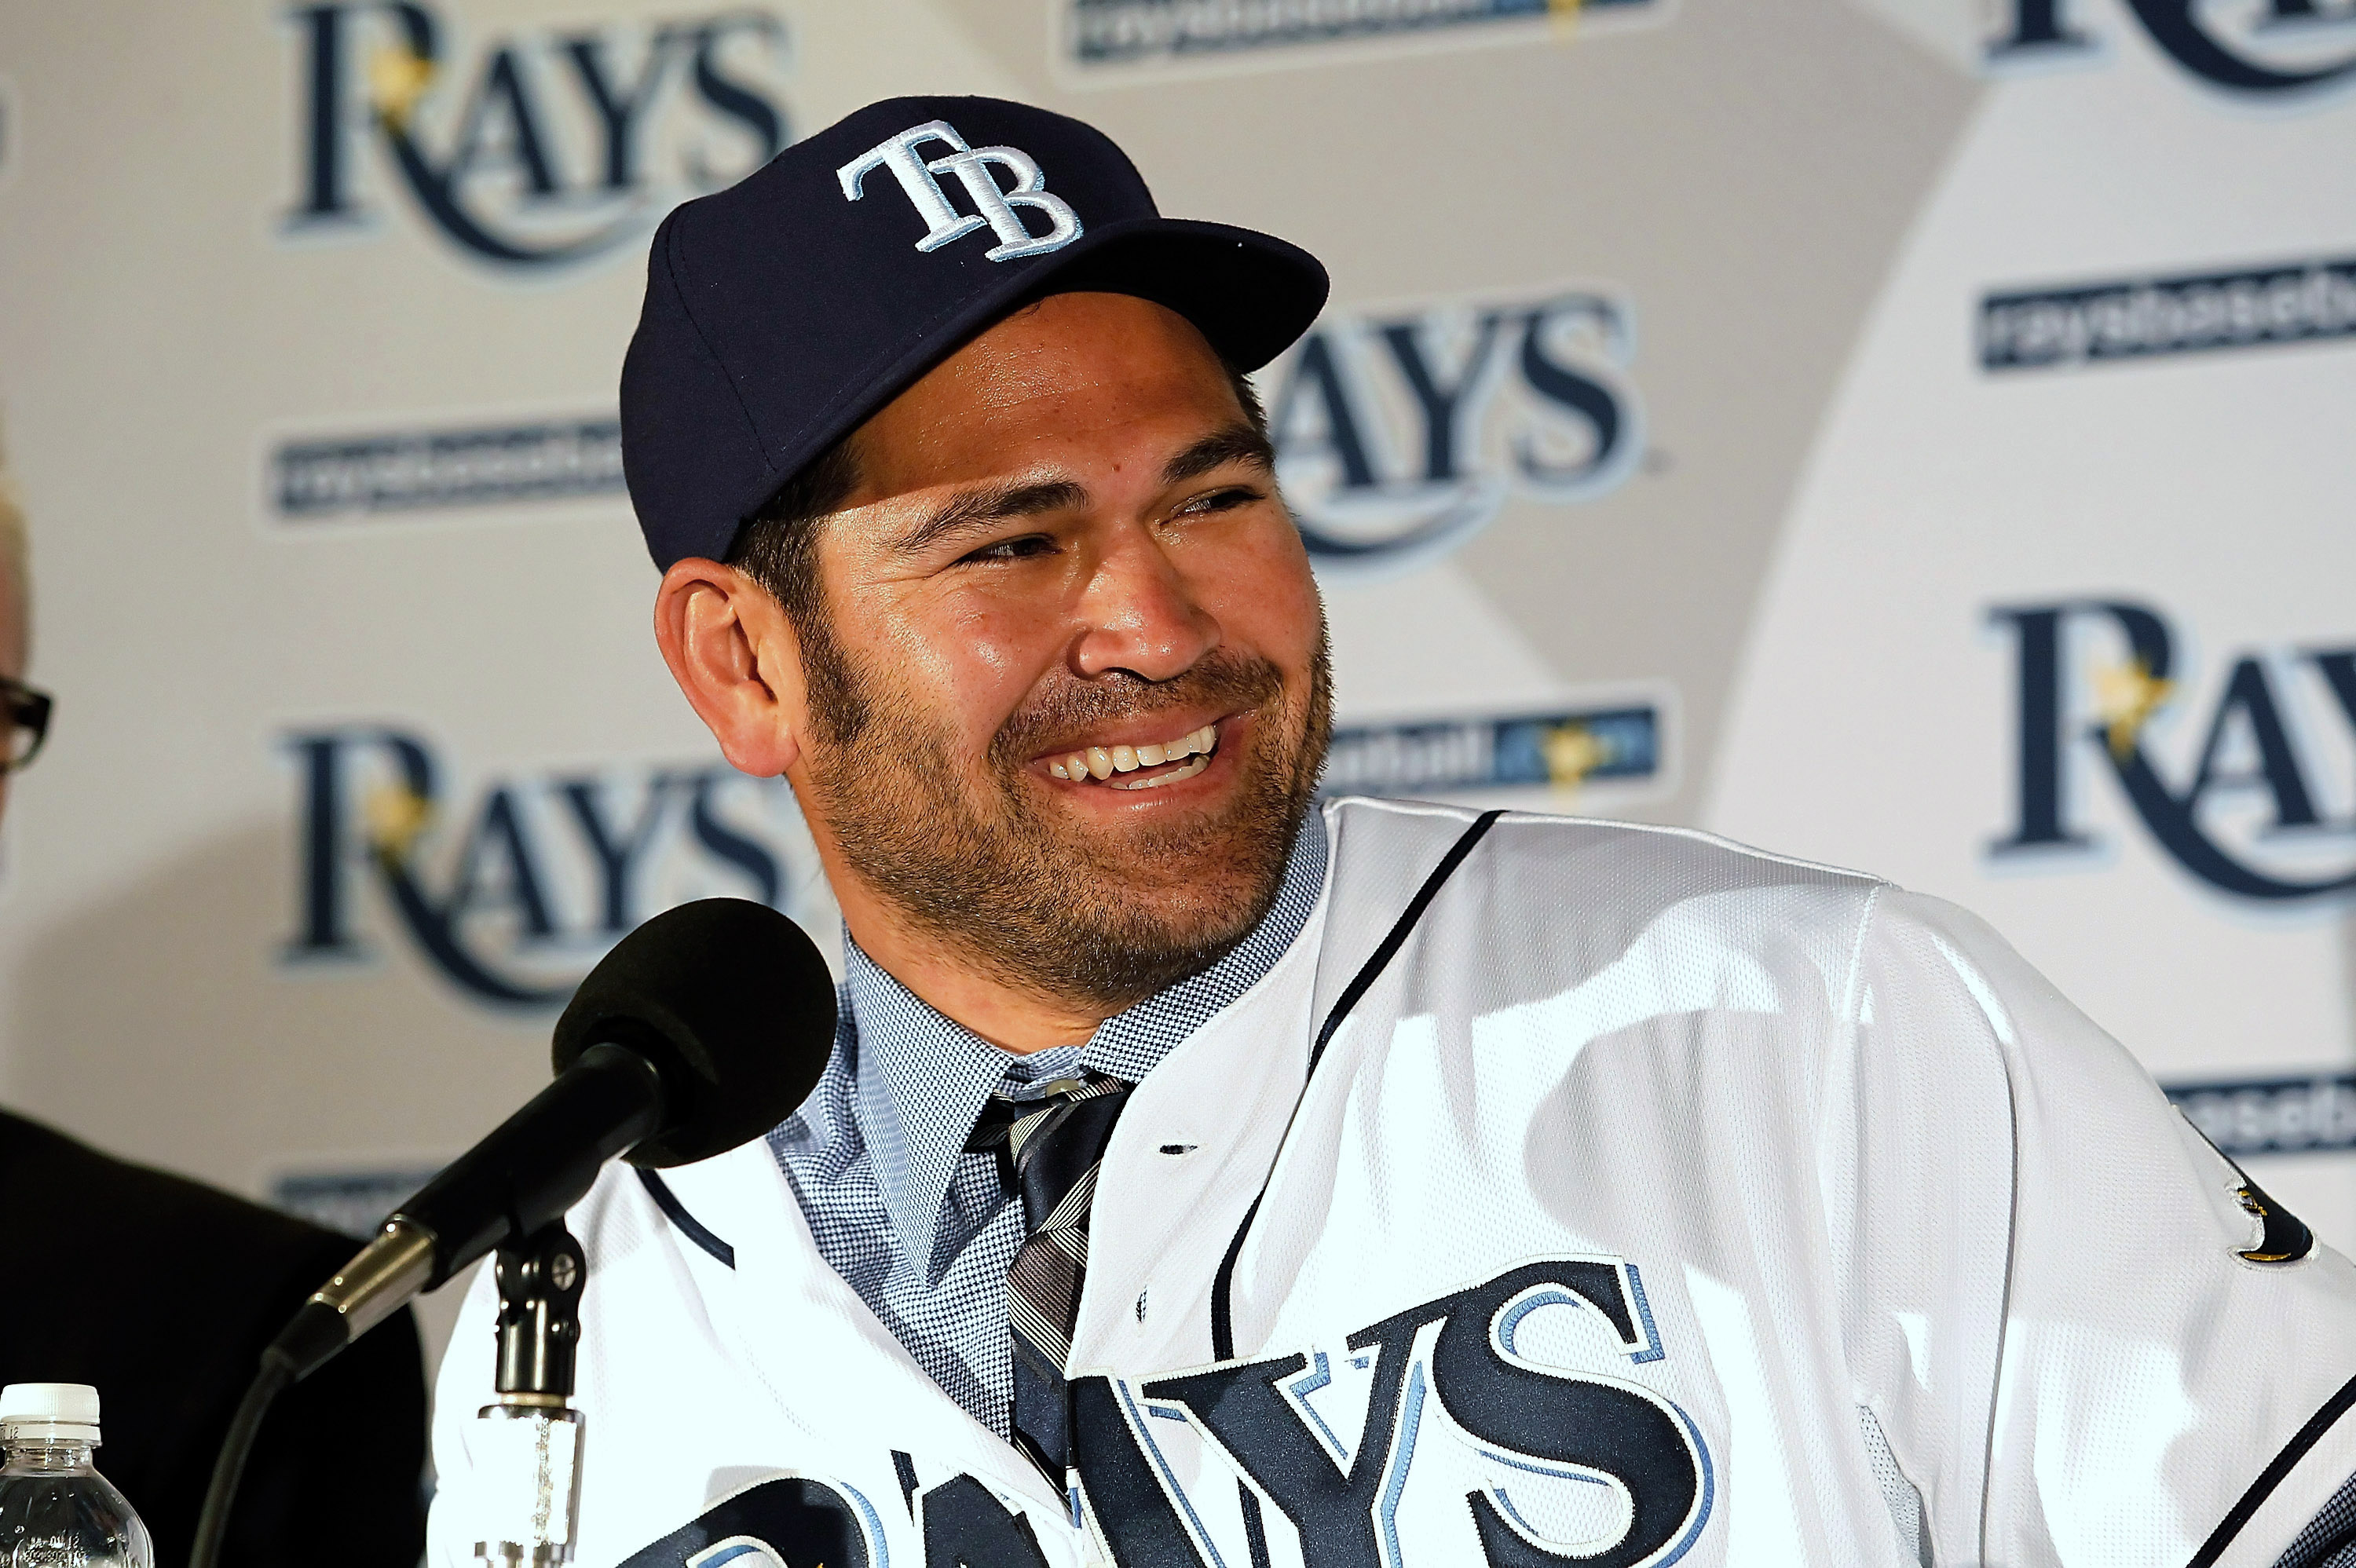 Tampa Bay Rays sign Johnny Damon, Manny Ramirez to one-year deals, reunite  old Red Sox teammates – New York Daily News